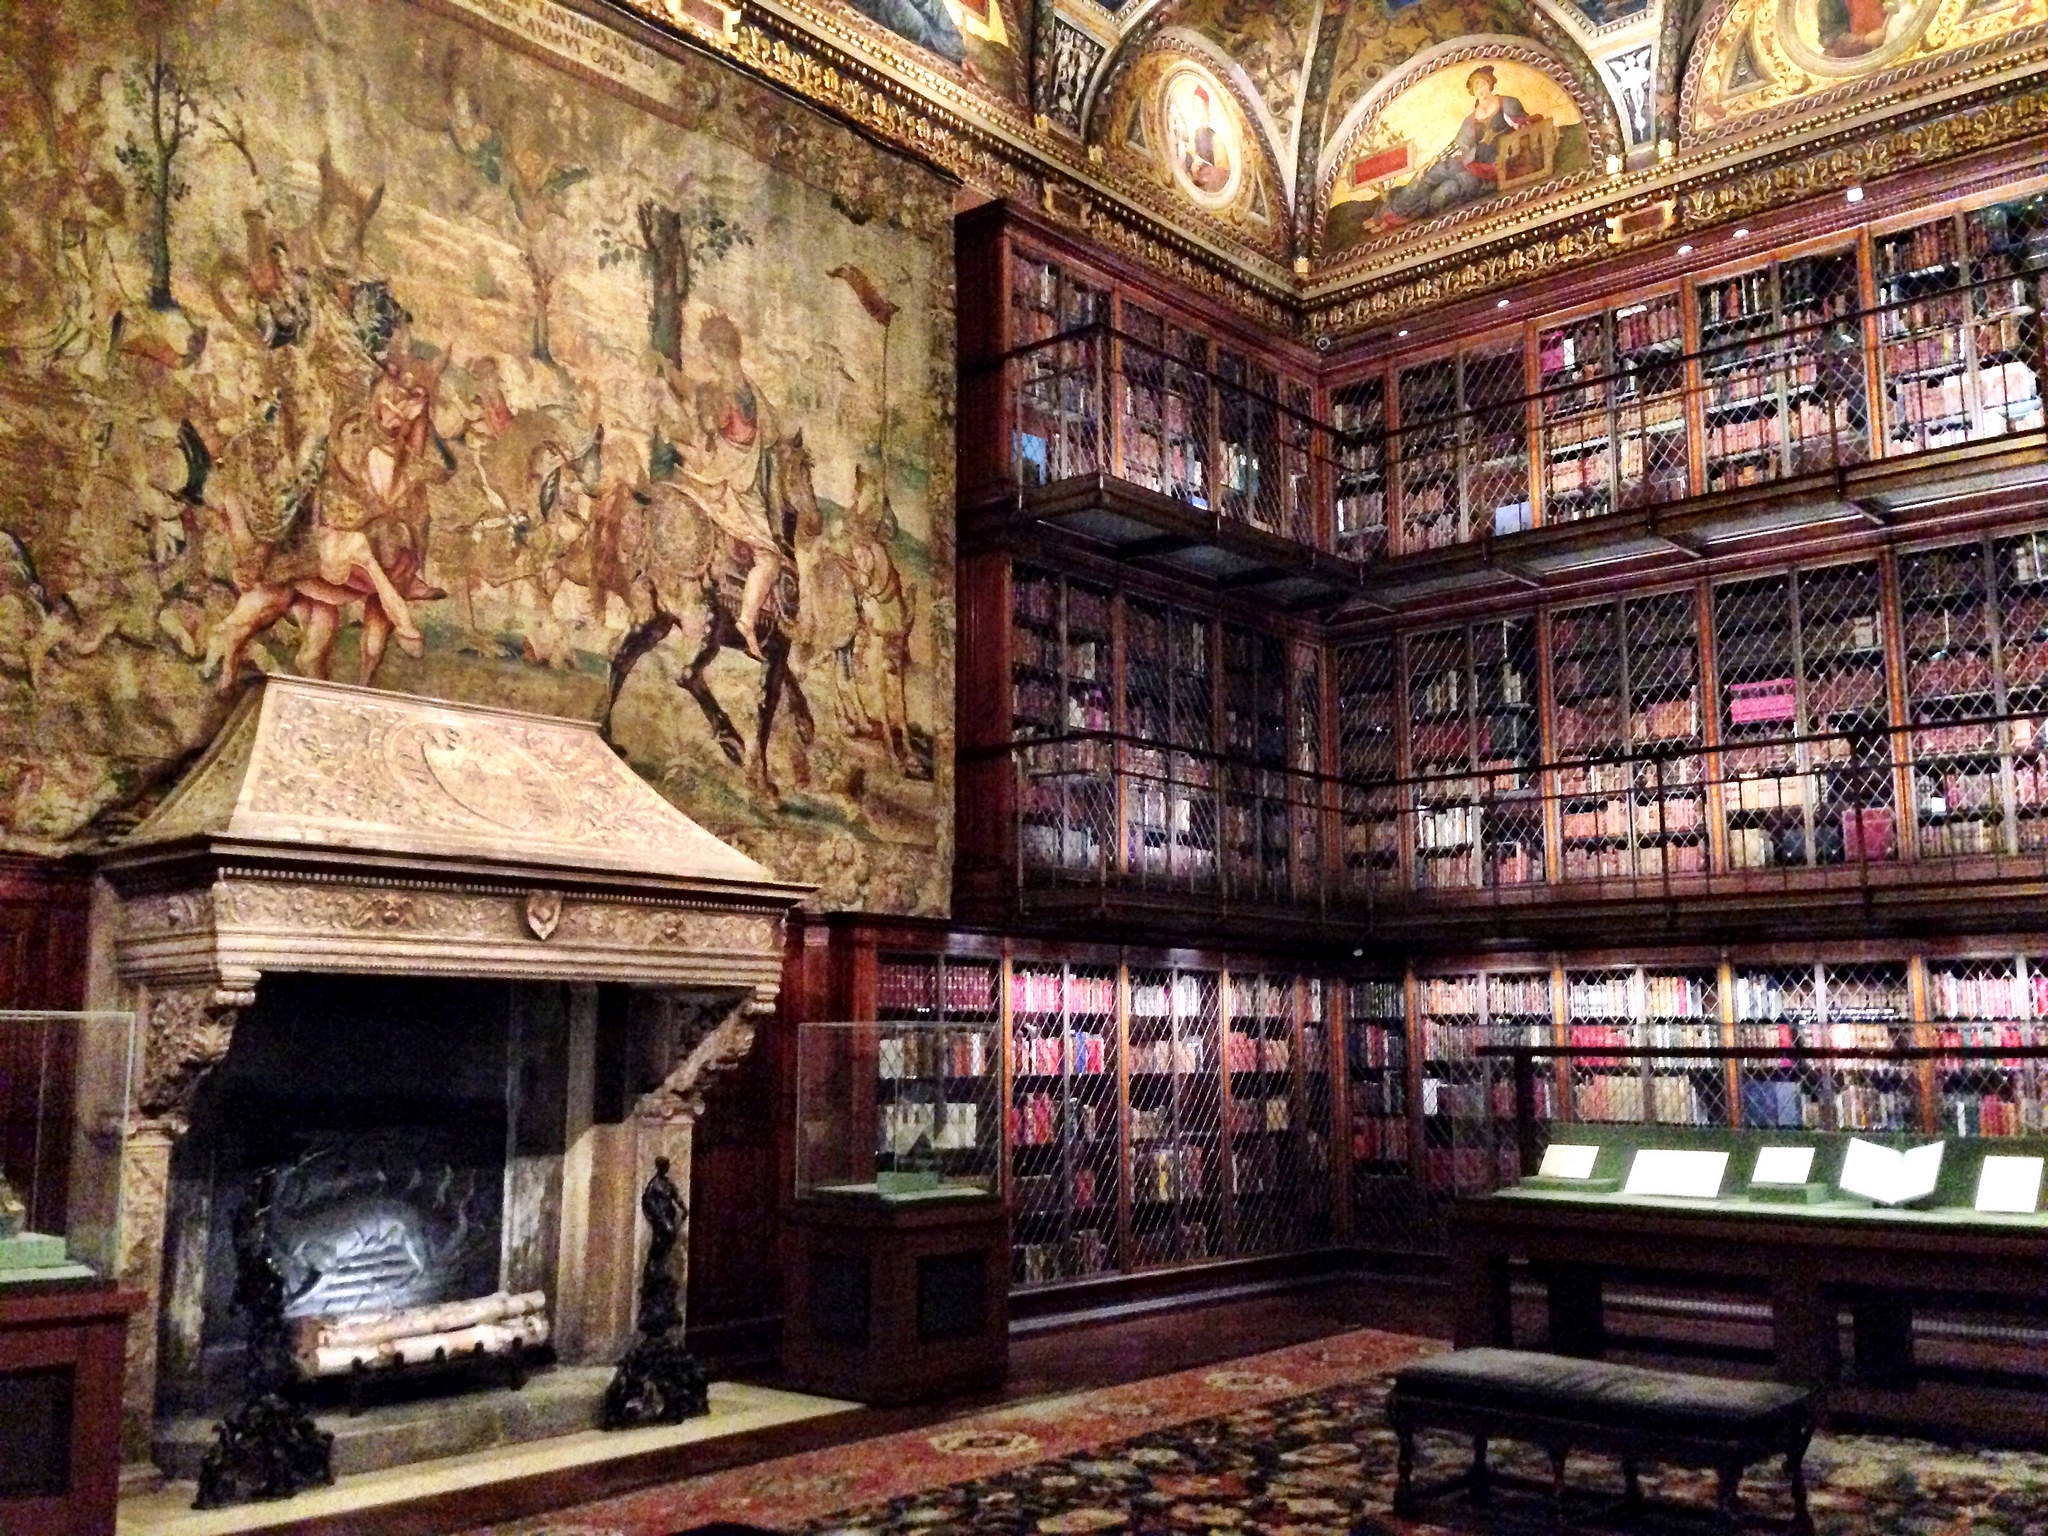 The Morgan Library - My View from the Middle Seat